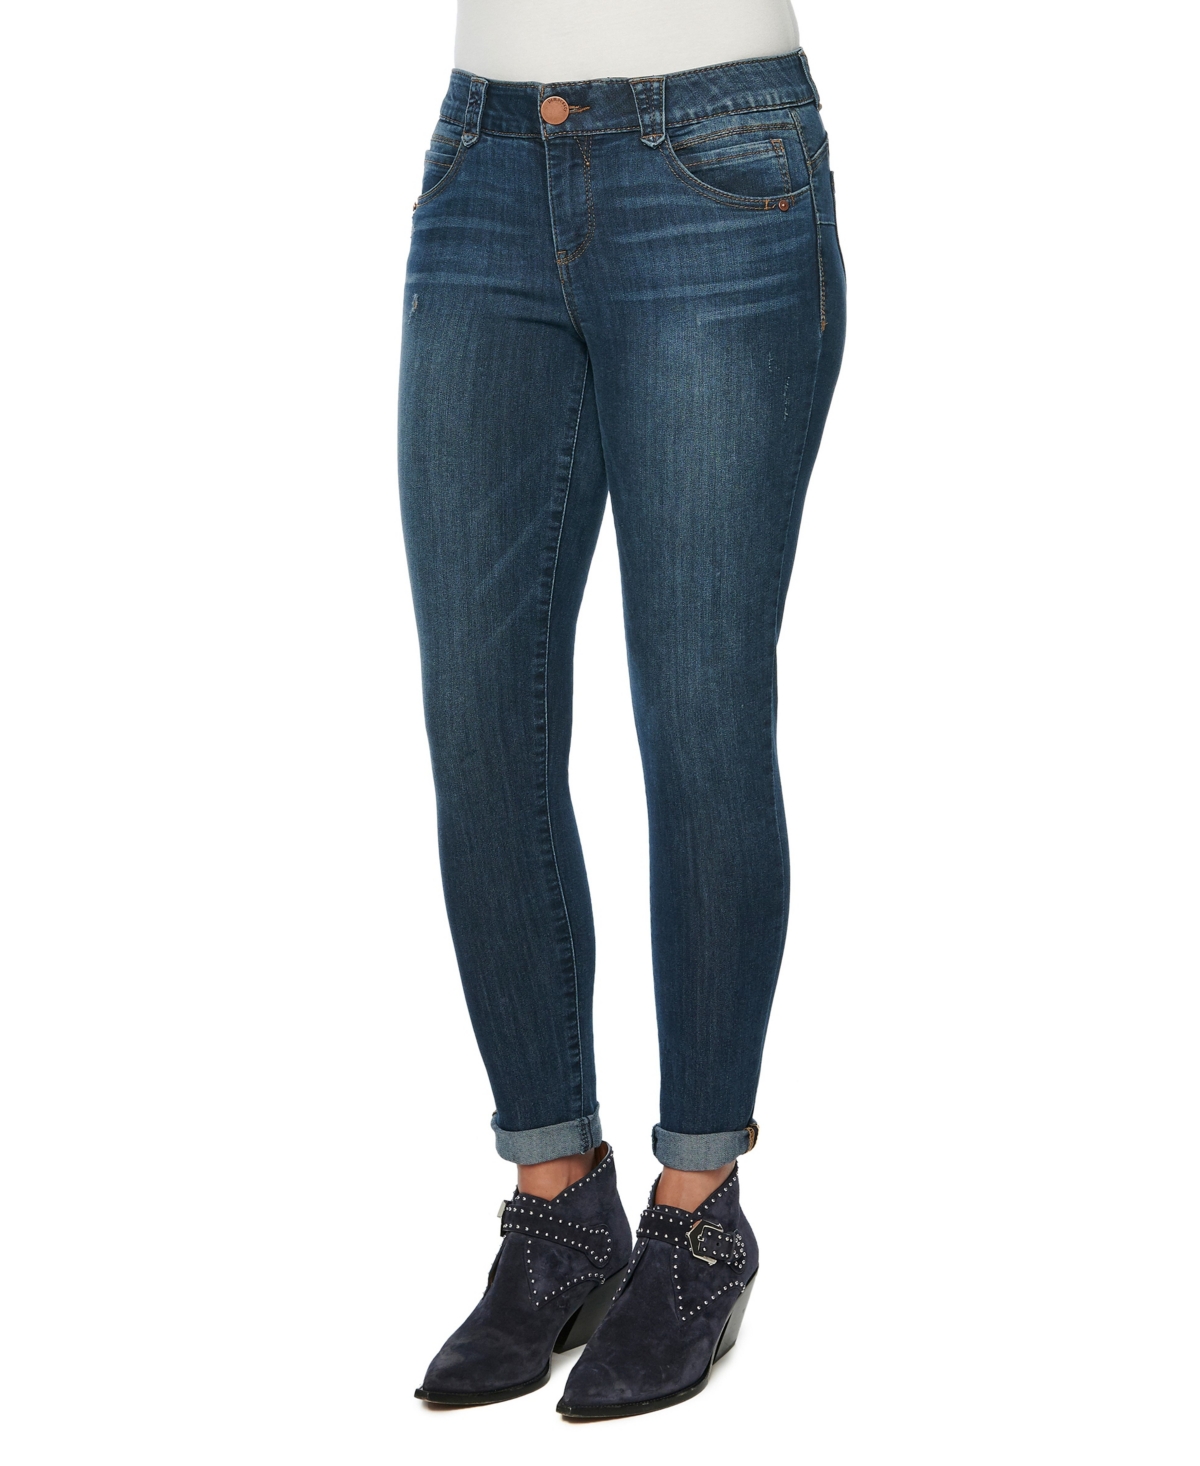 Women's "Ab"Solution Ankle Length Uncuffed Jeans - In Indigo